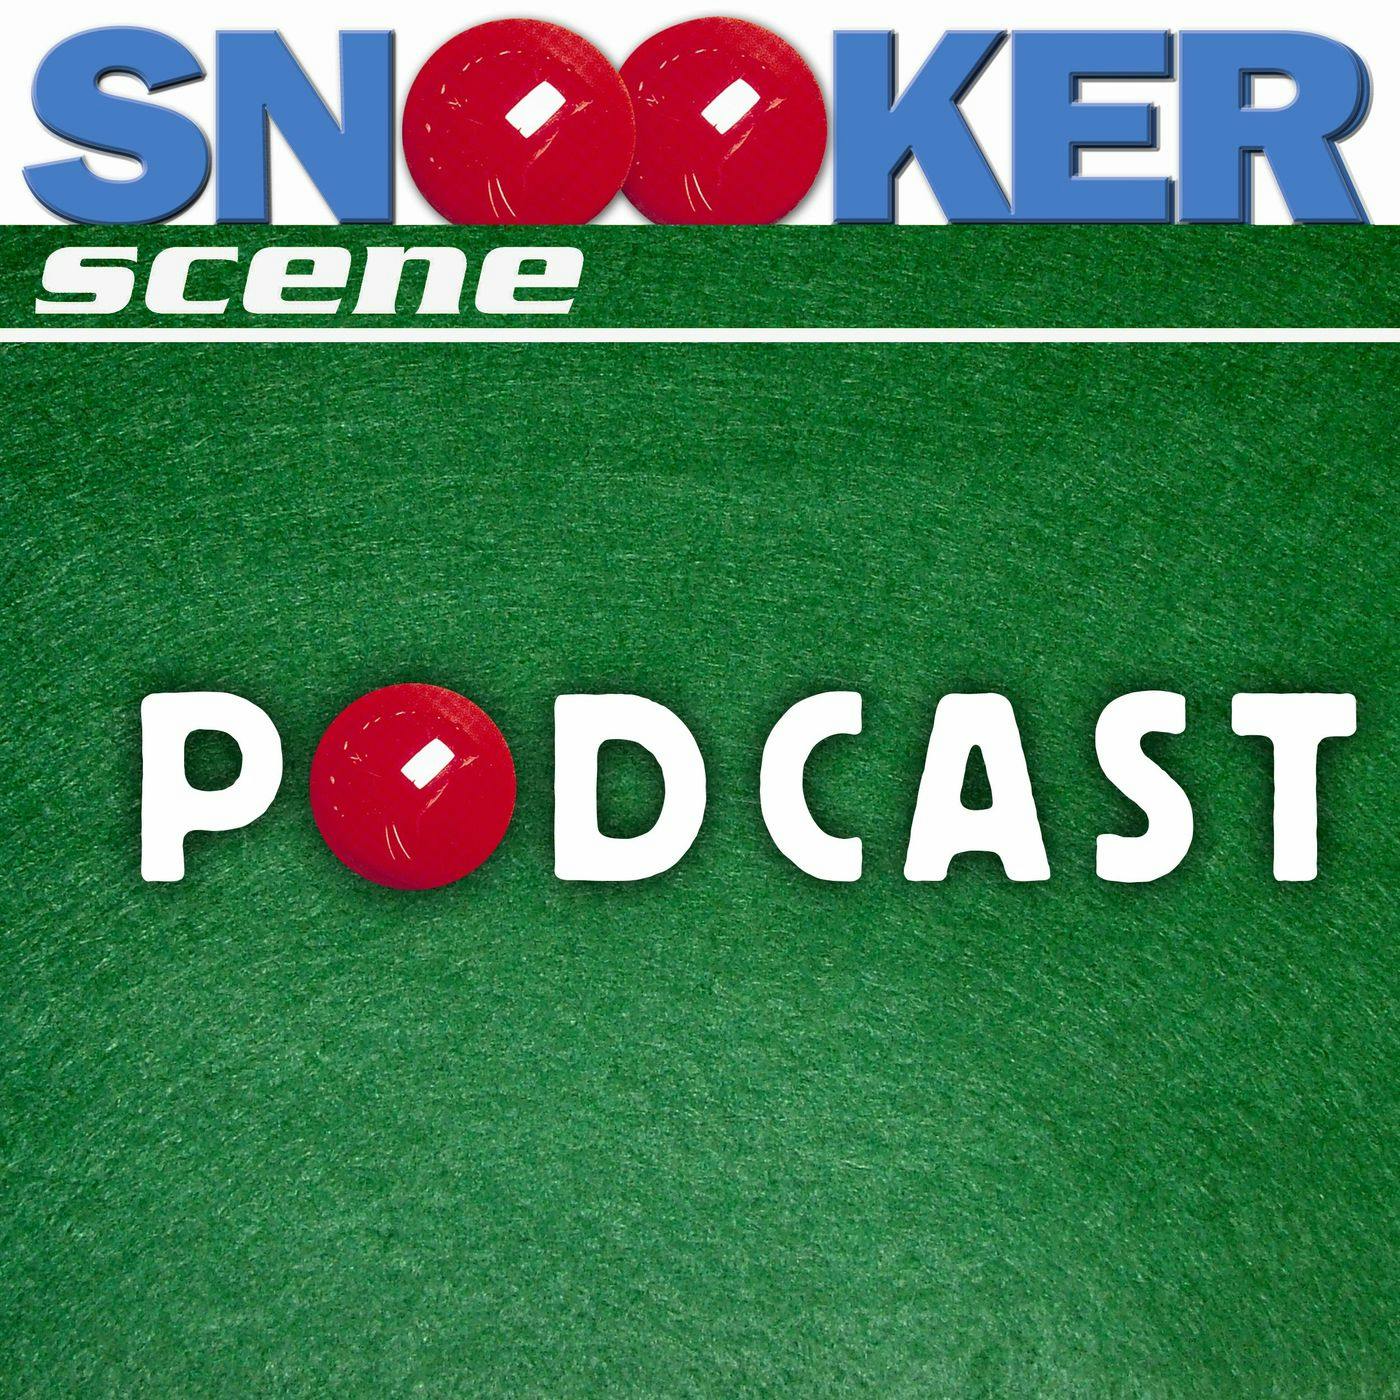 Snooker Scene Podcast episode 96 - Review of the Decade